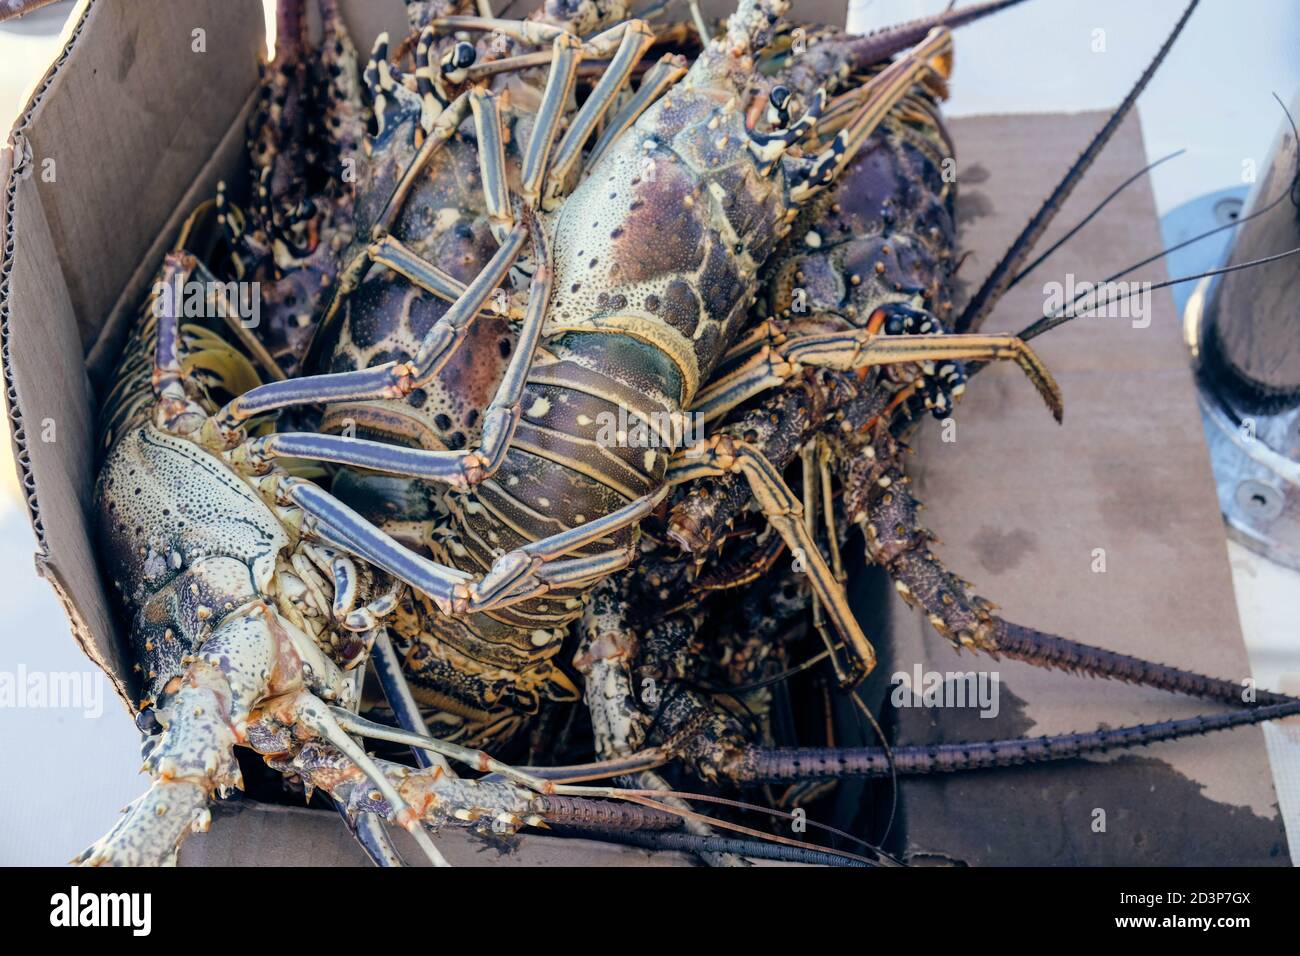 Closeup of caught lobster in caribbean being sold in a box on the market in cuba Stock Photo